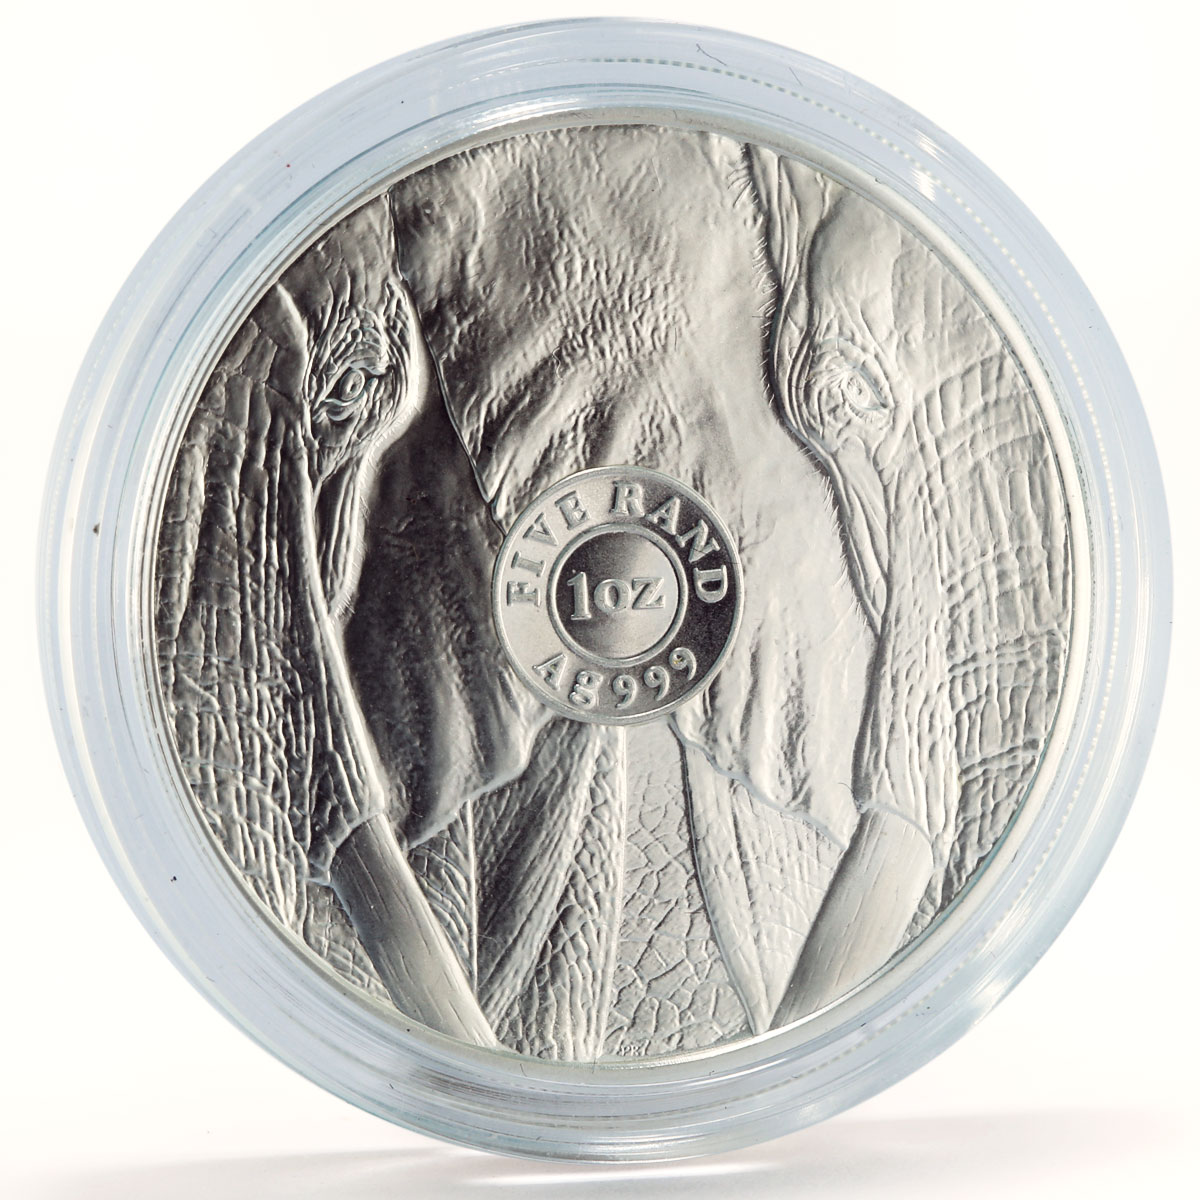 South Africa 5 rand The Big Five series The Elephant silver coin 2019